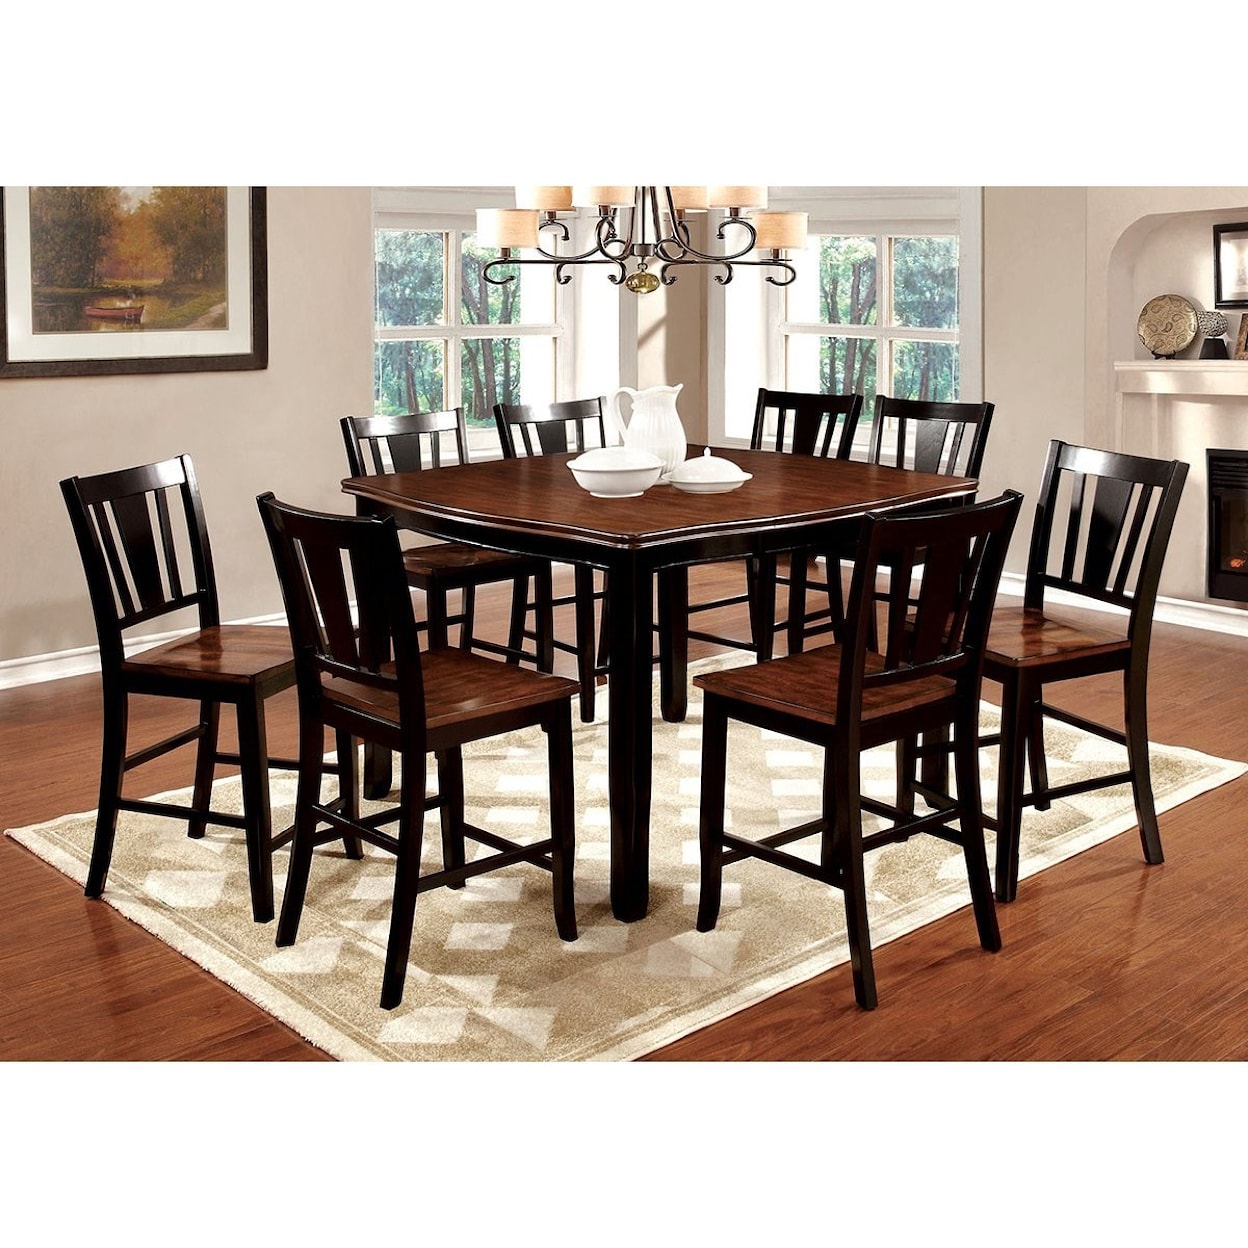 Furniture of America Dover II Table + 6 Side Chairs